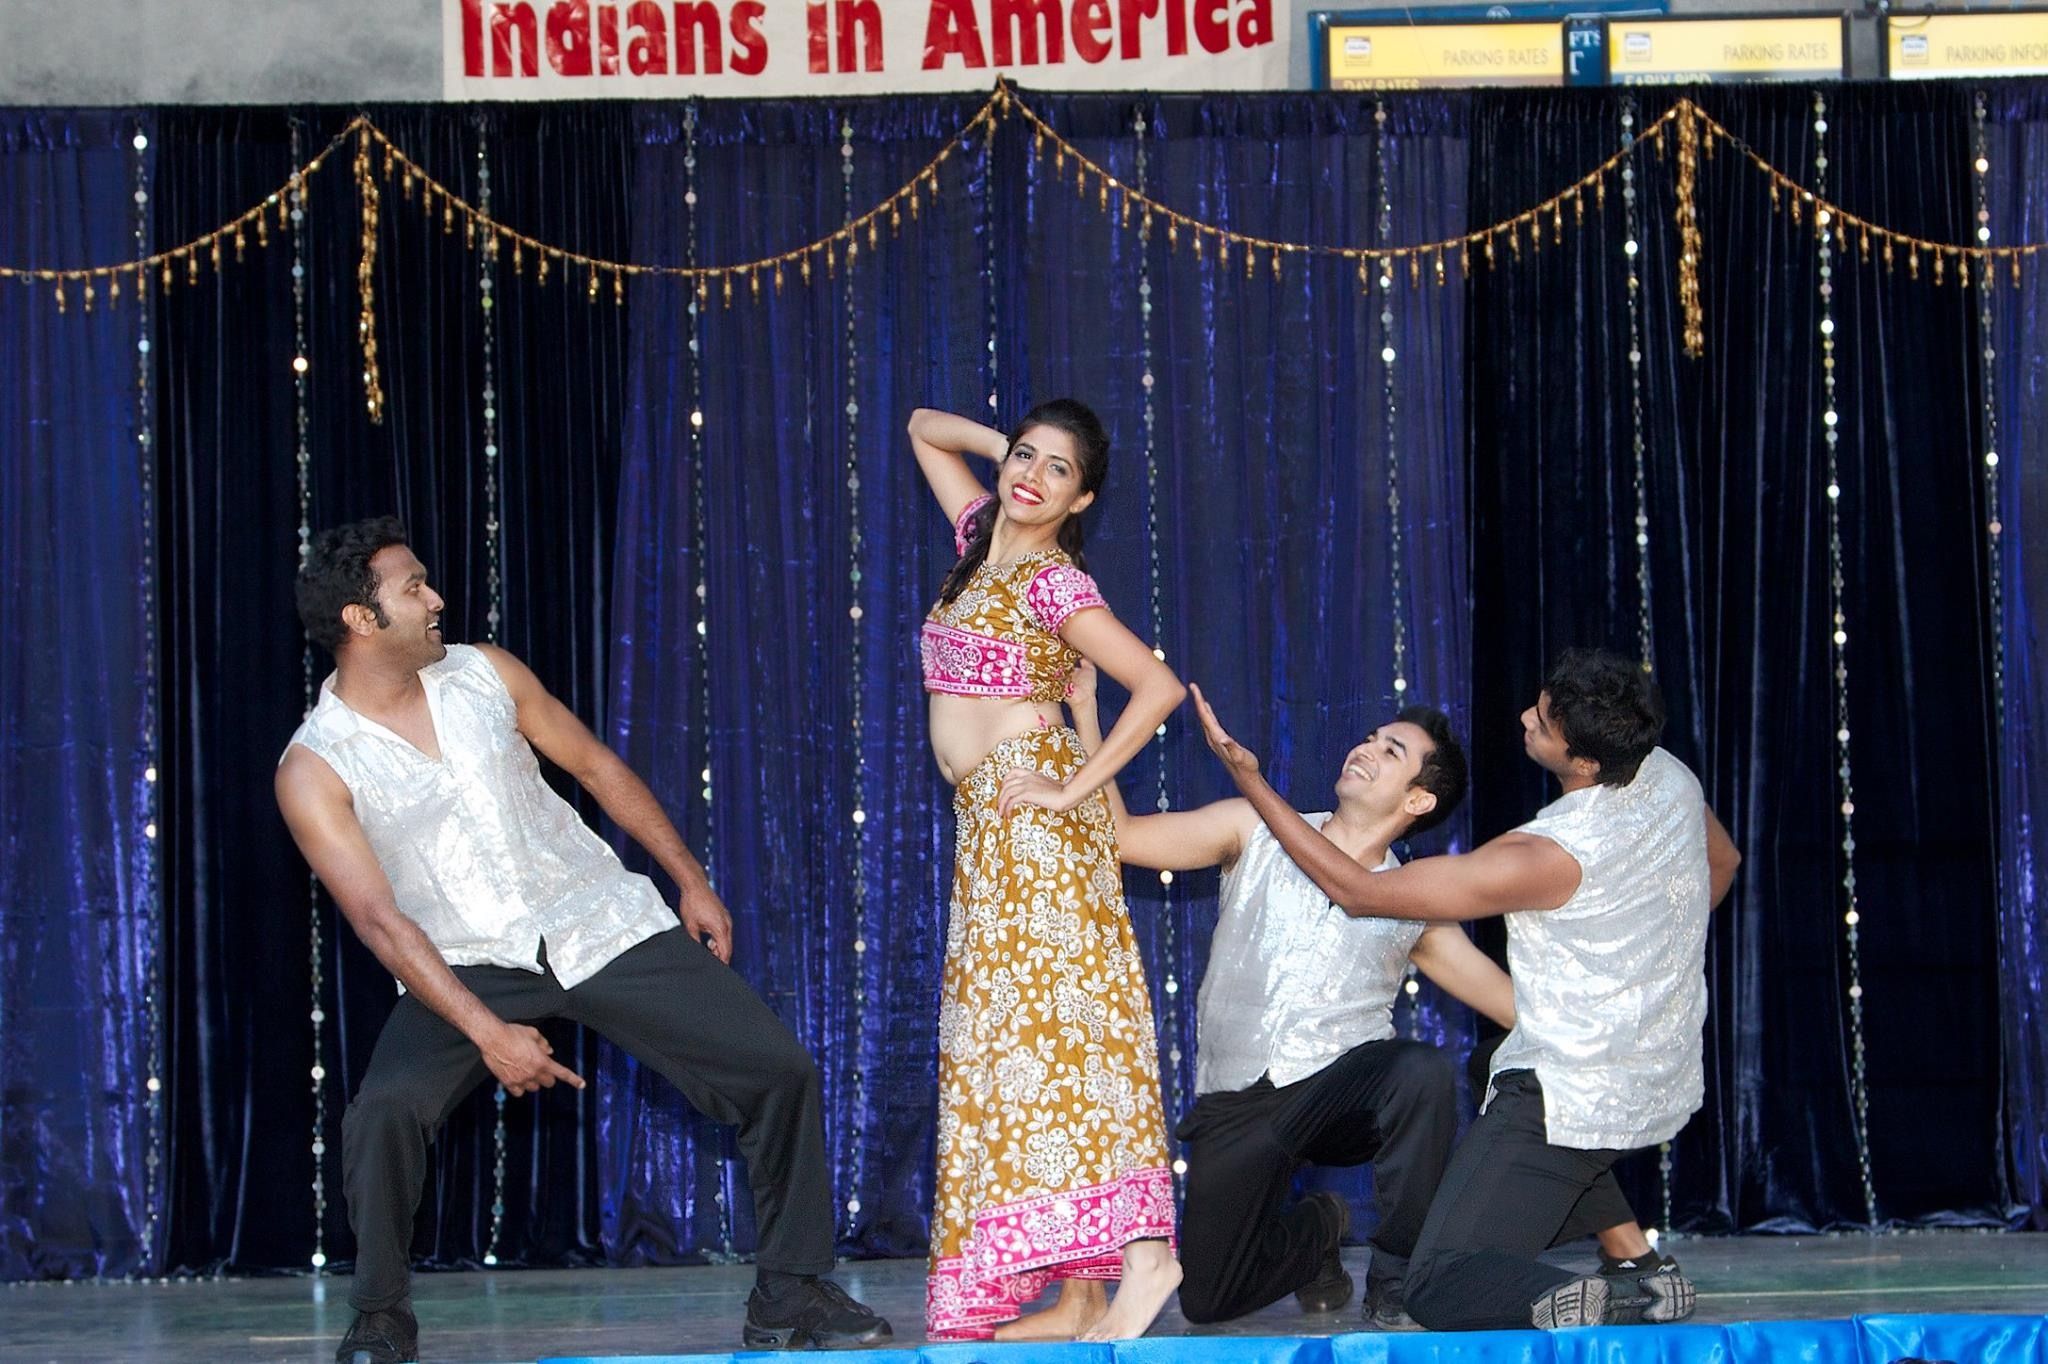 Indians in America Dance Association Performance